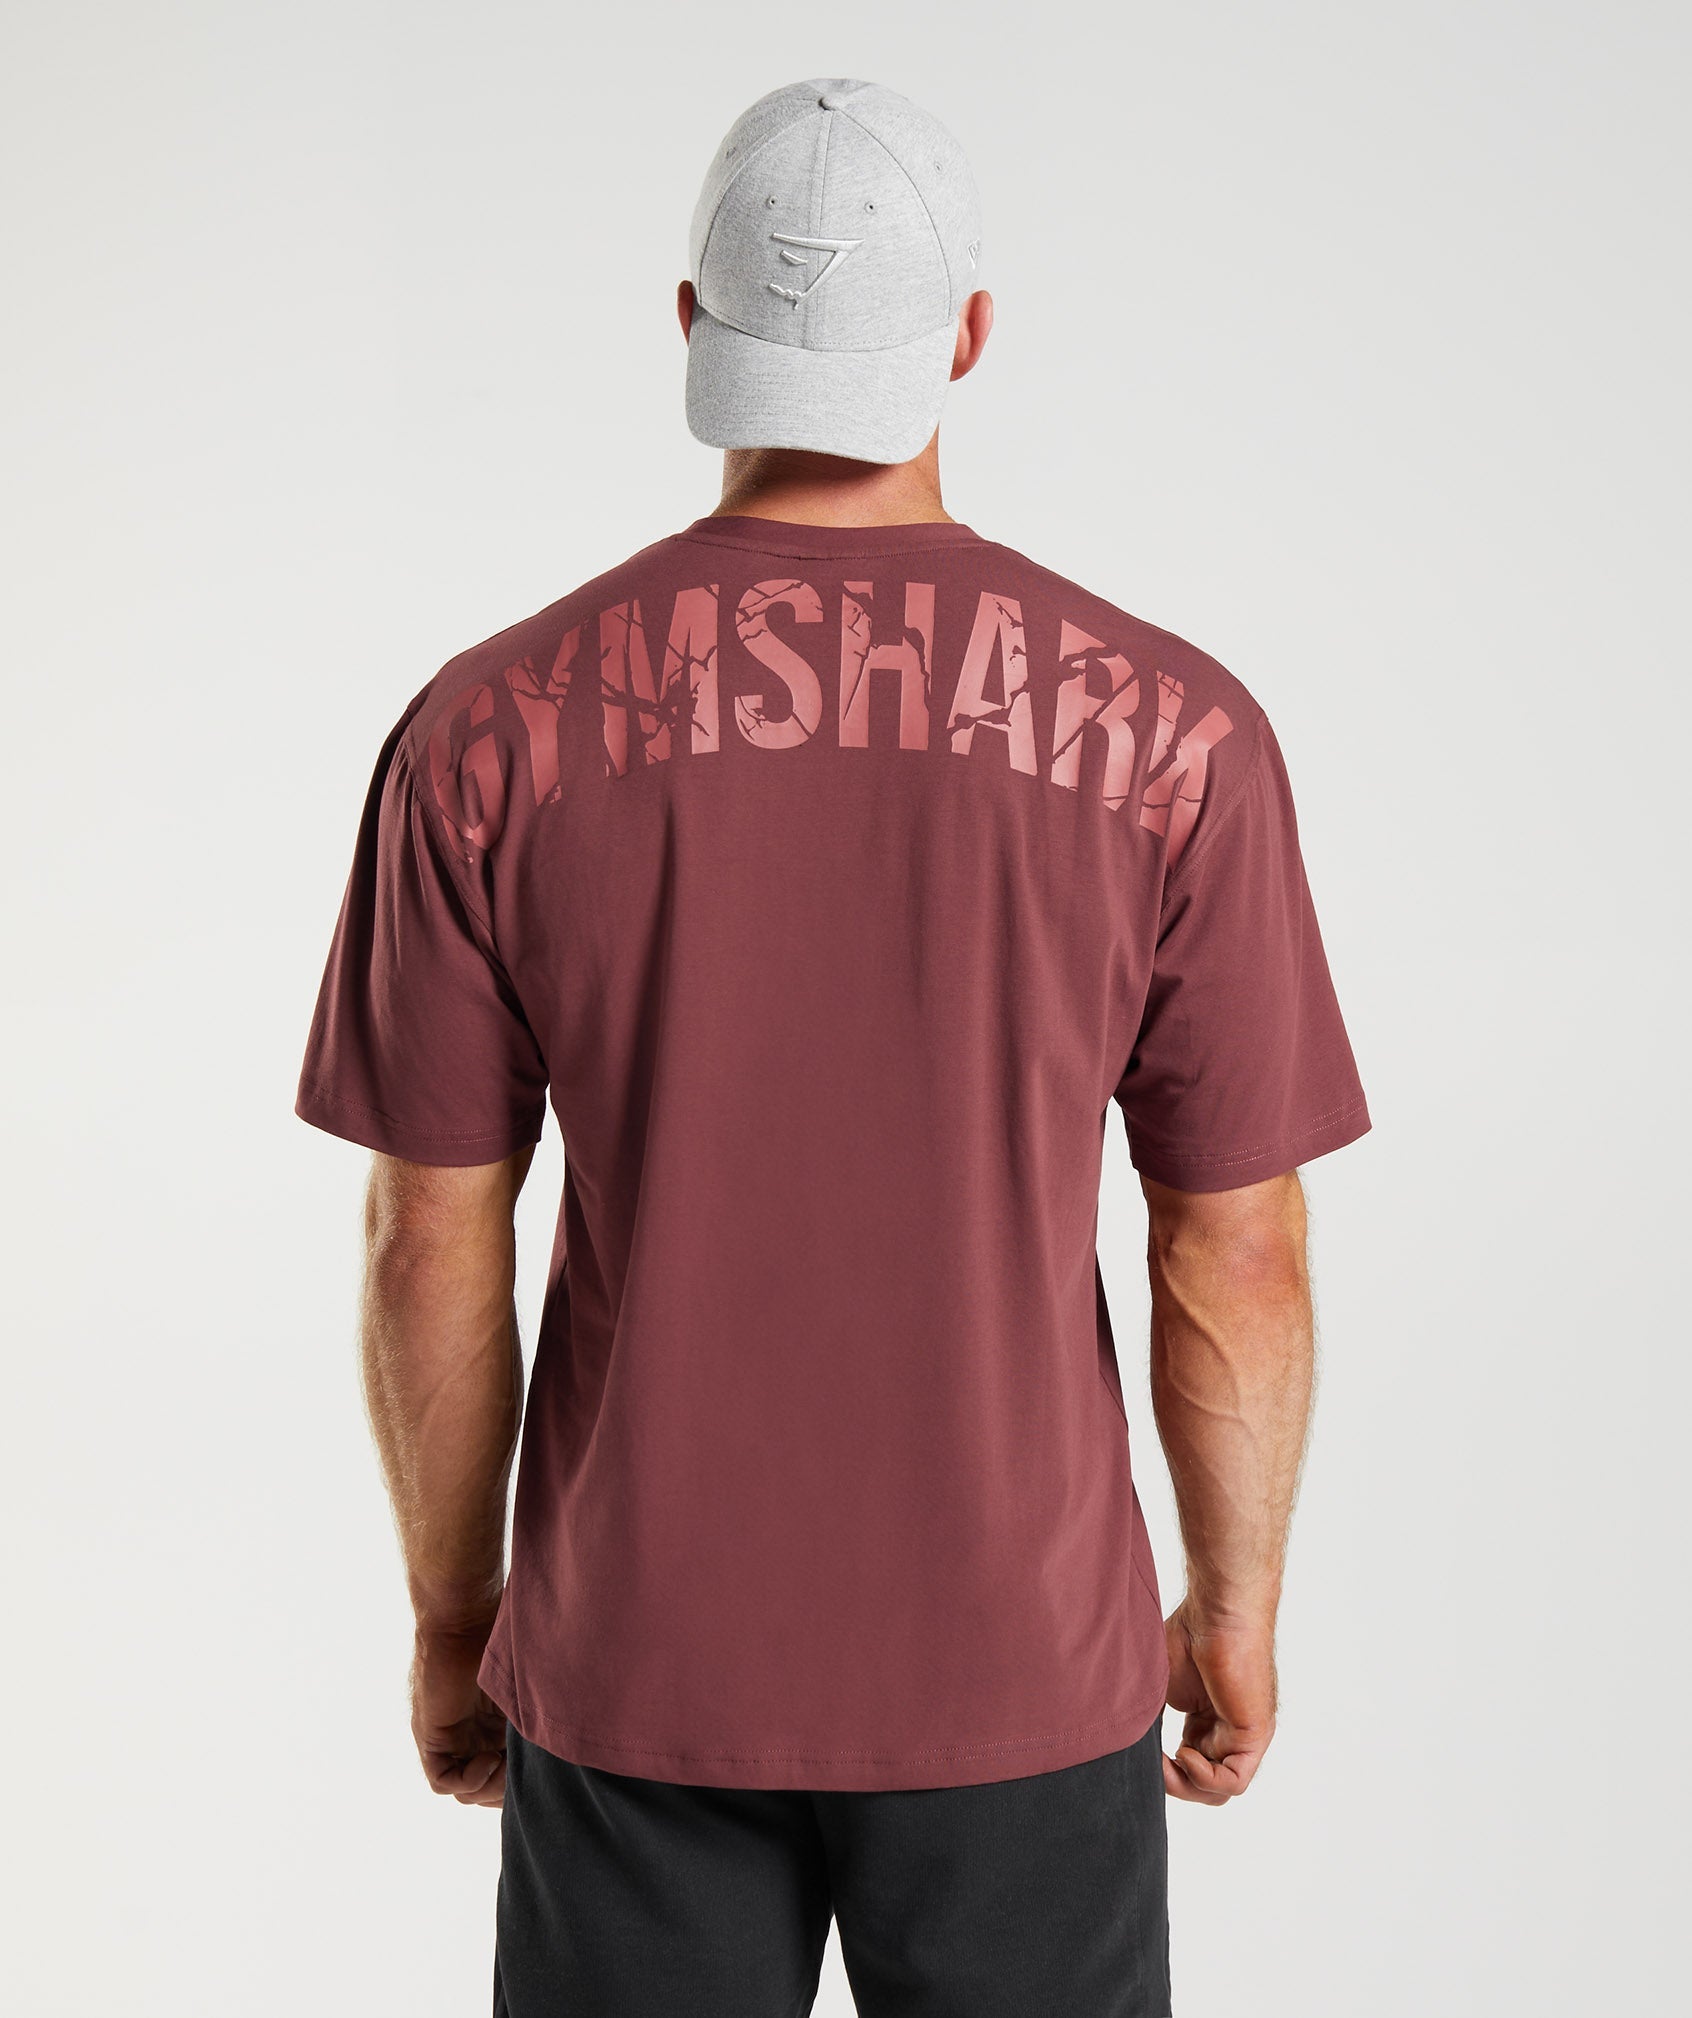 Power T-Shirt in Cherry Brown - view 1